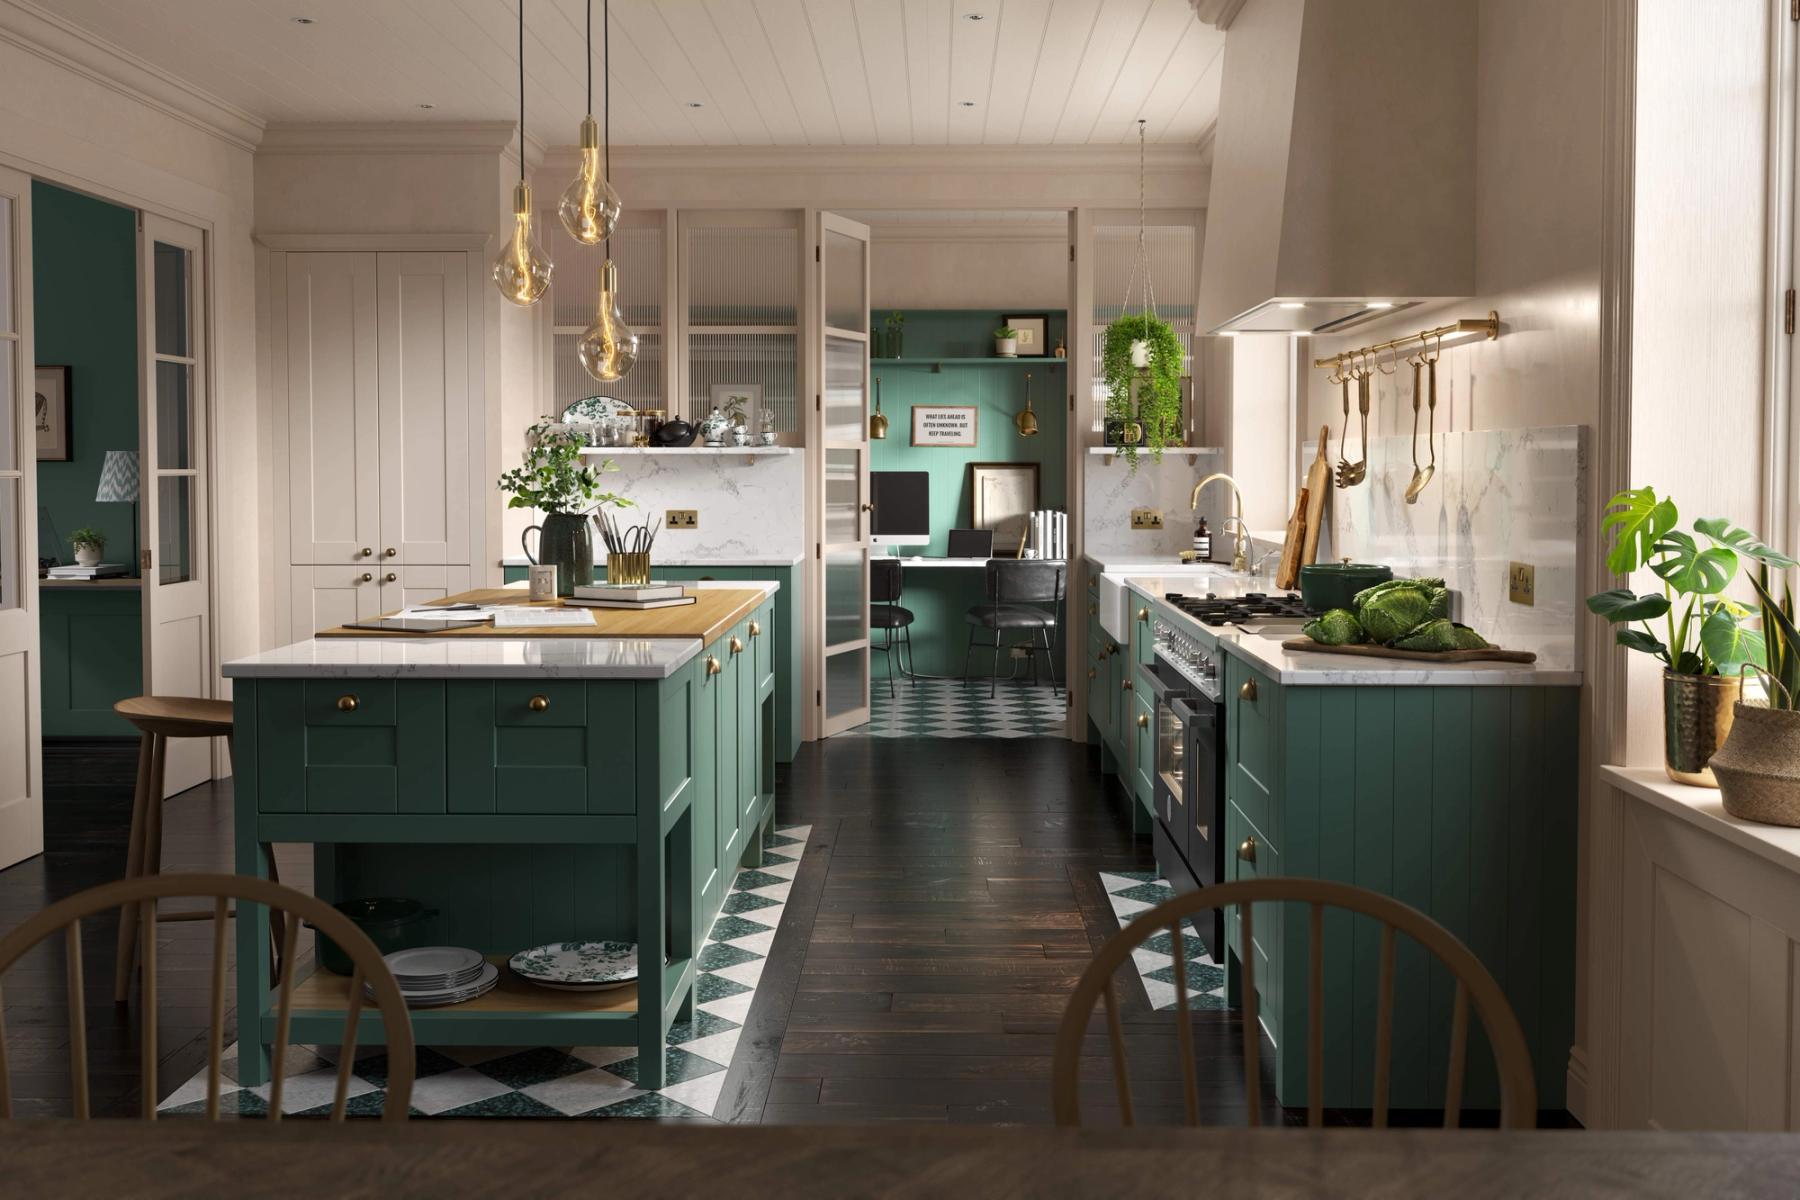 CGI cream and green kitchen interior with boot room utility, winner of Kitchen of the Year 2021.